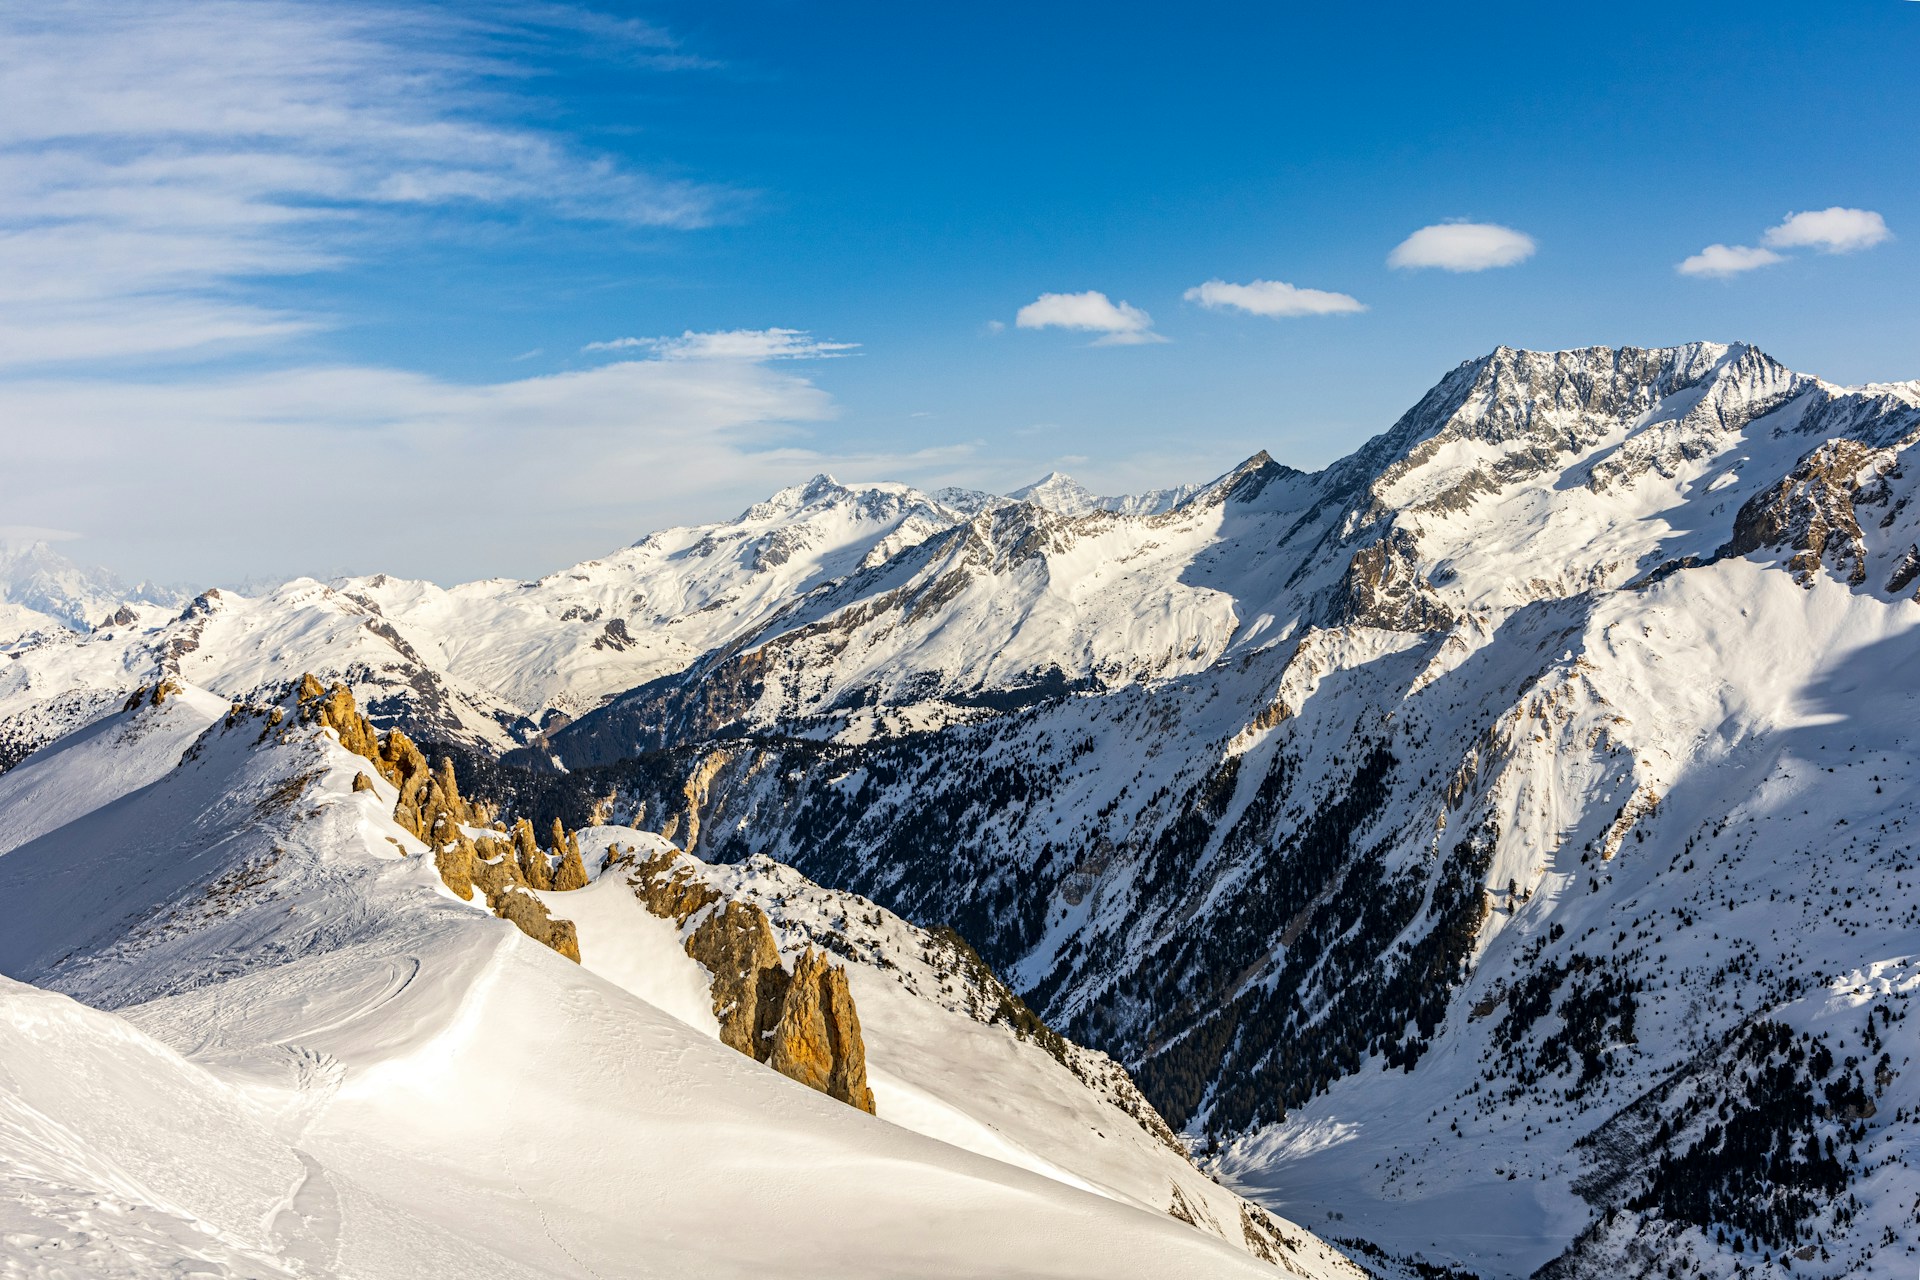 Can You Ski All Three Valleys in One Day?